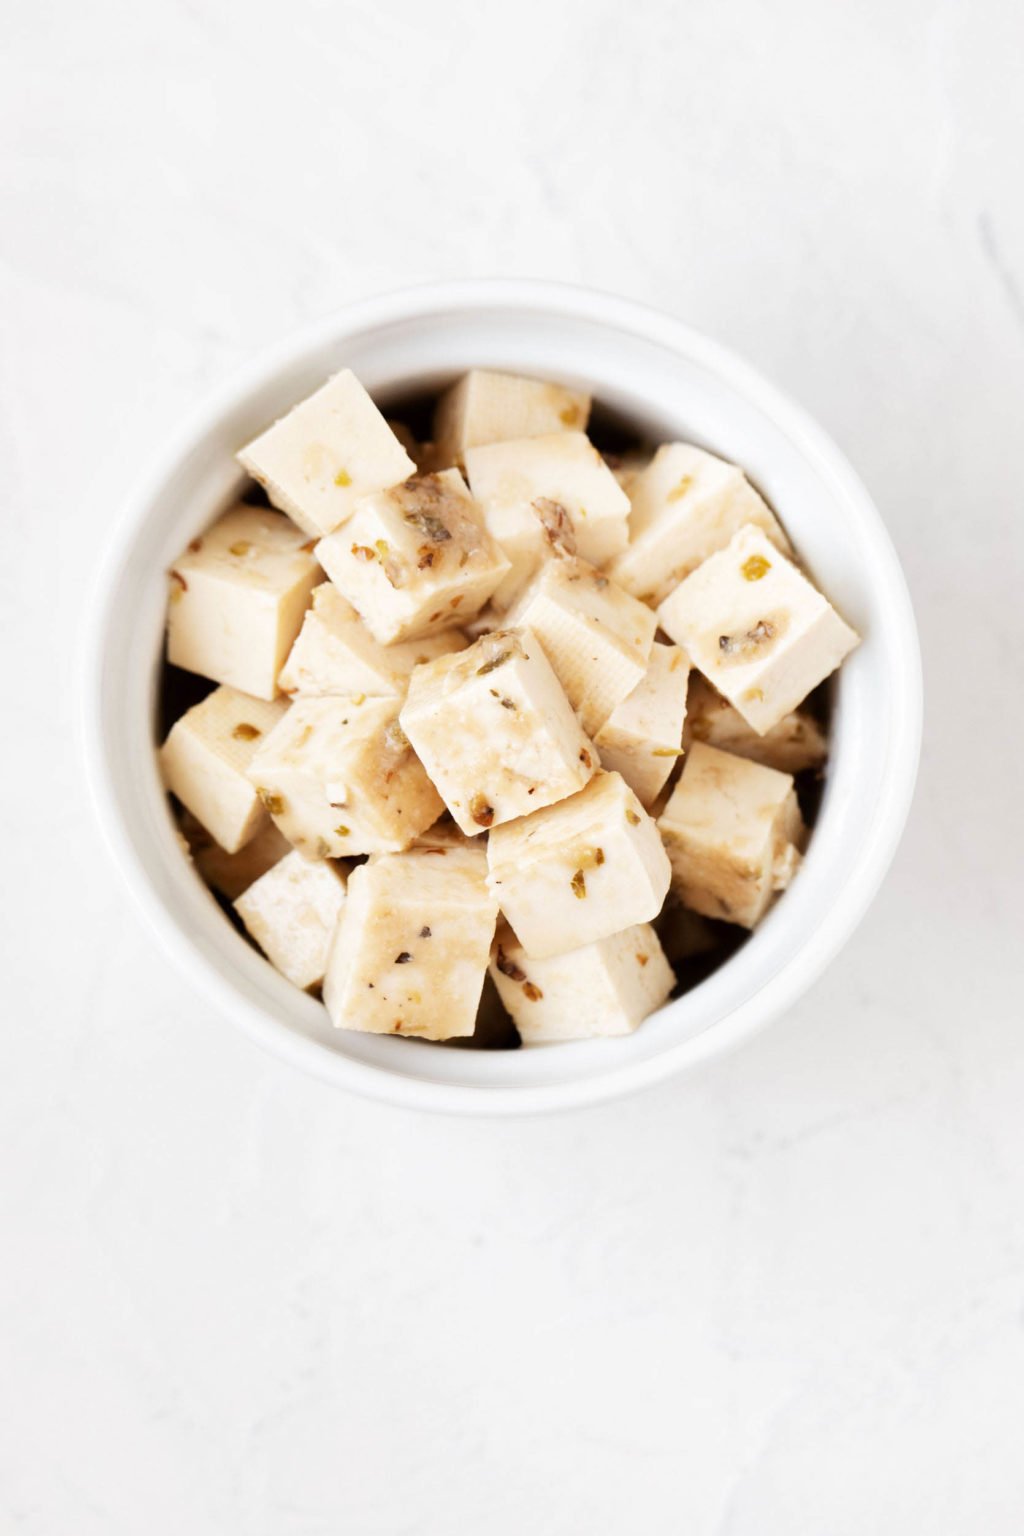 A small, white round ramekin has been filled with cubes of marinated tofu and dried herbs. It sits on a white backdrop.